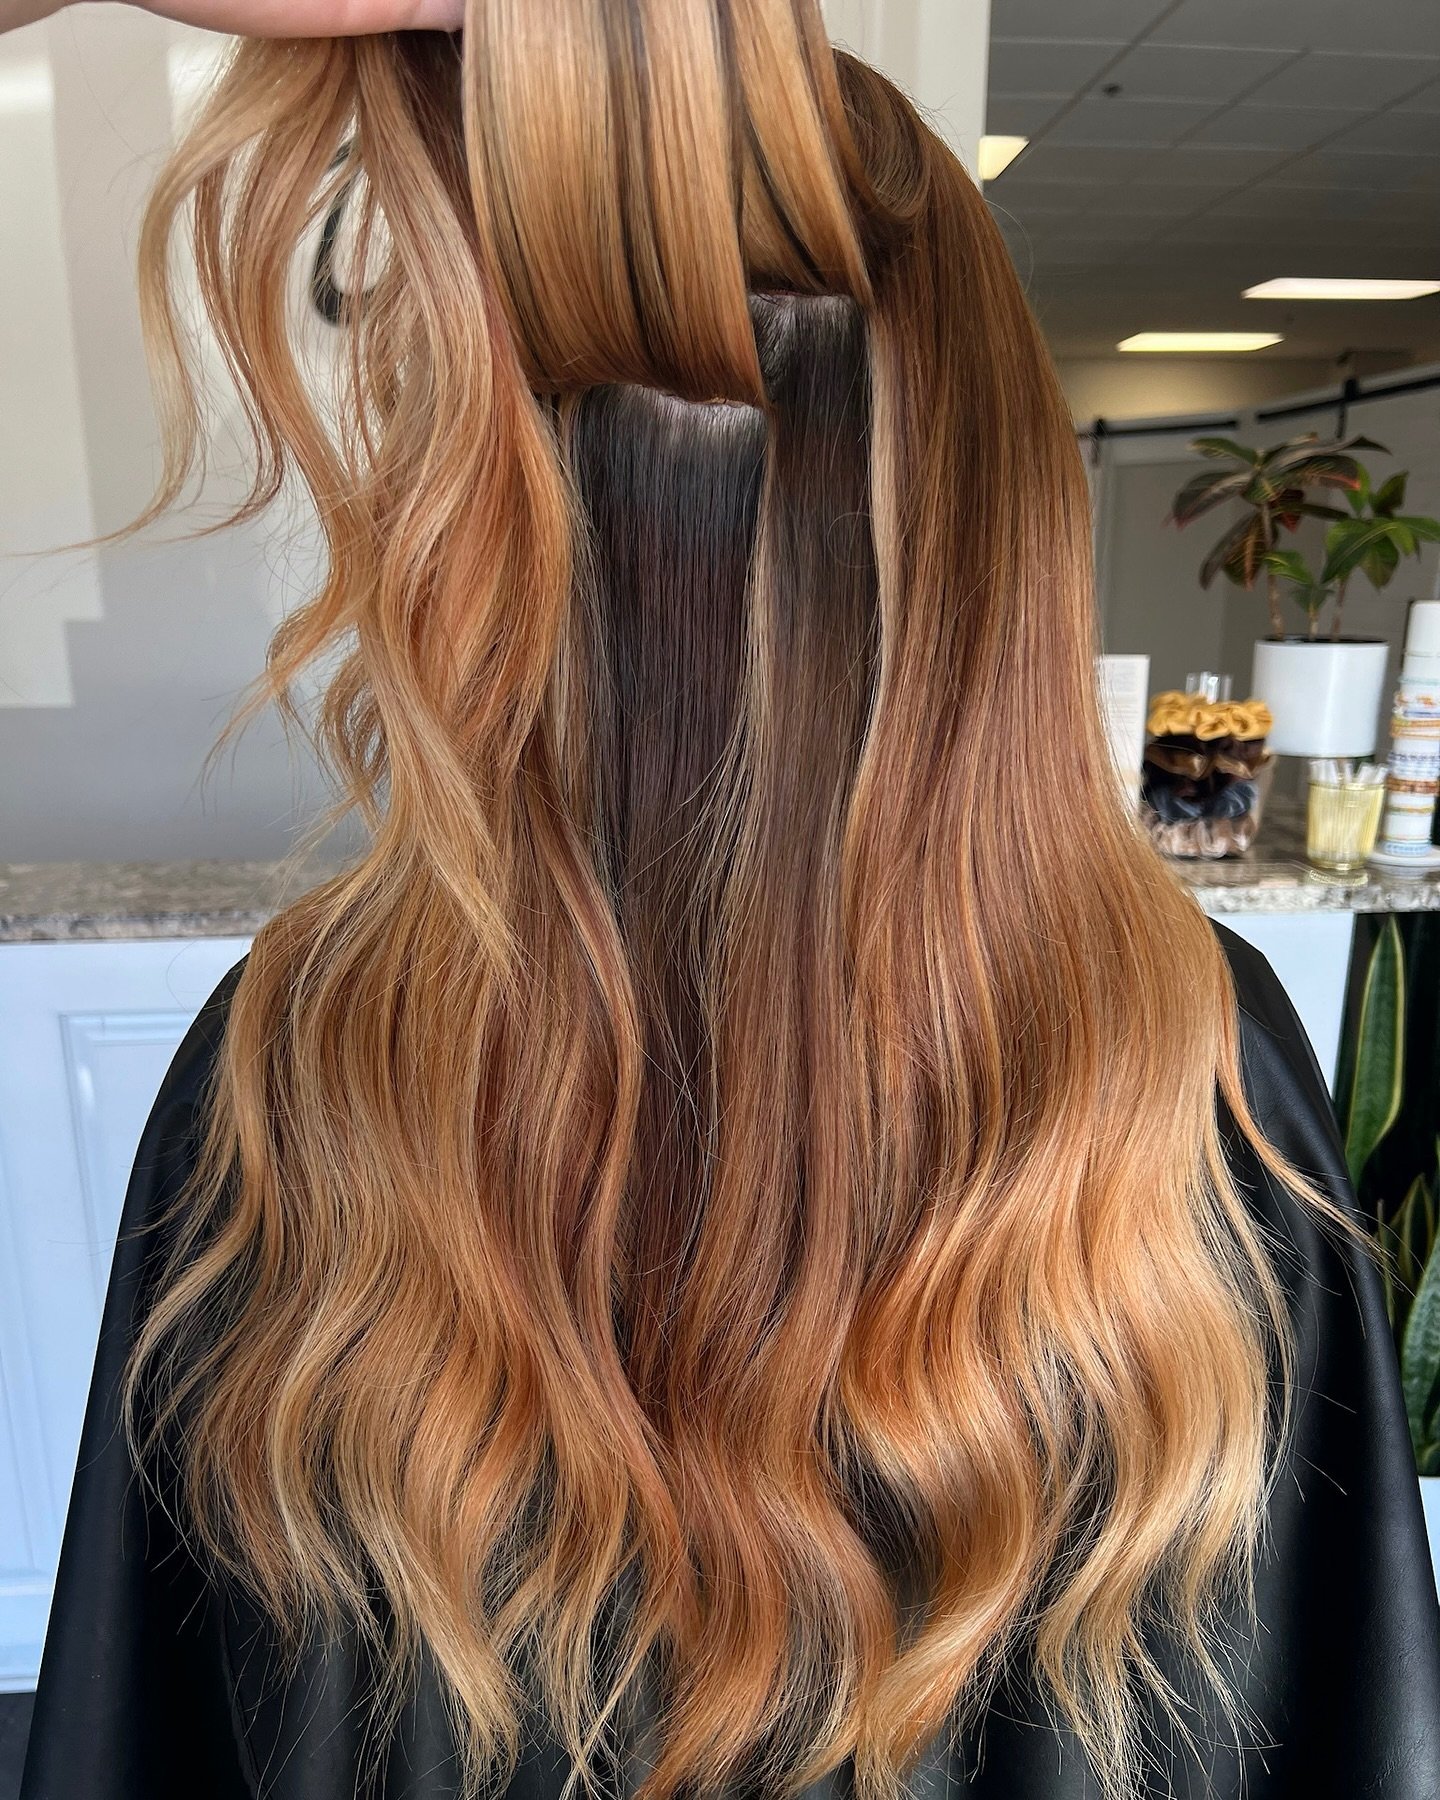 Extensions are the perfect way to add the length and volume you&rsquo;ve always wanted! ✨

We are here to answer all your questions and be sure that they are a good fit for you and your goals. Book a consultation at E+E we would love to meet you. ✨

